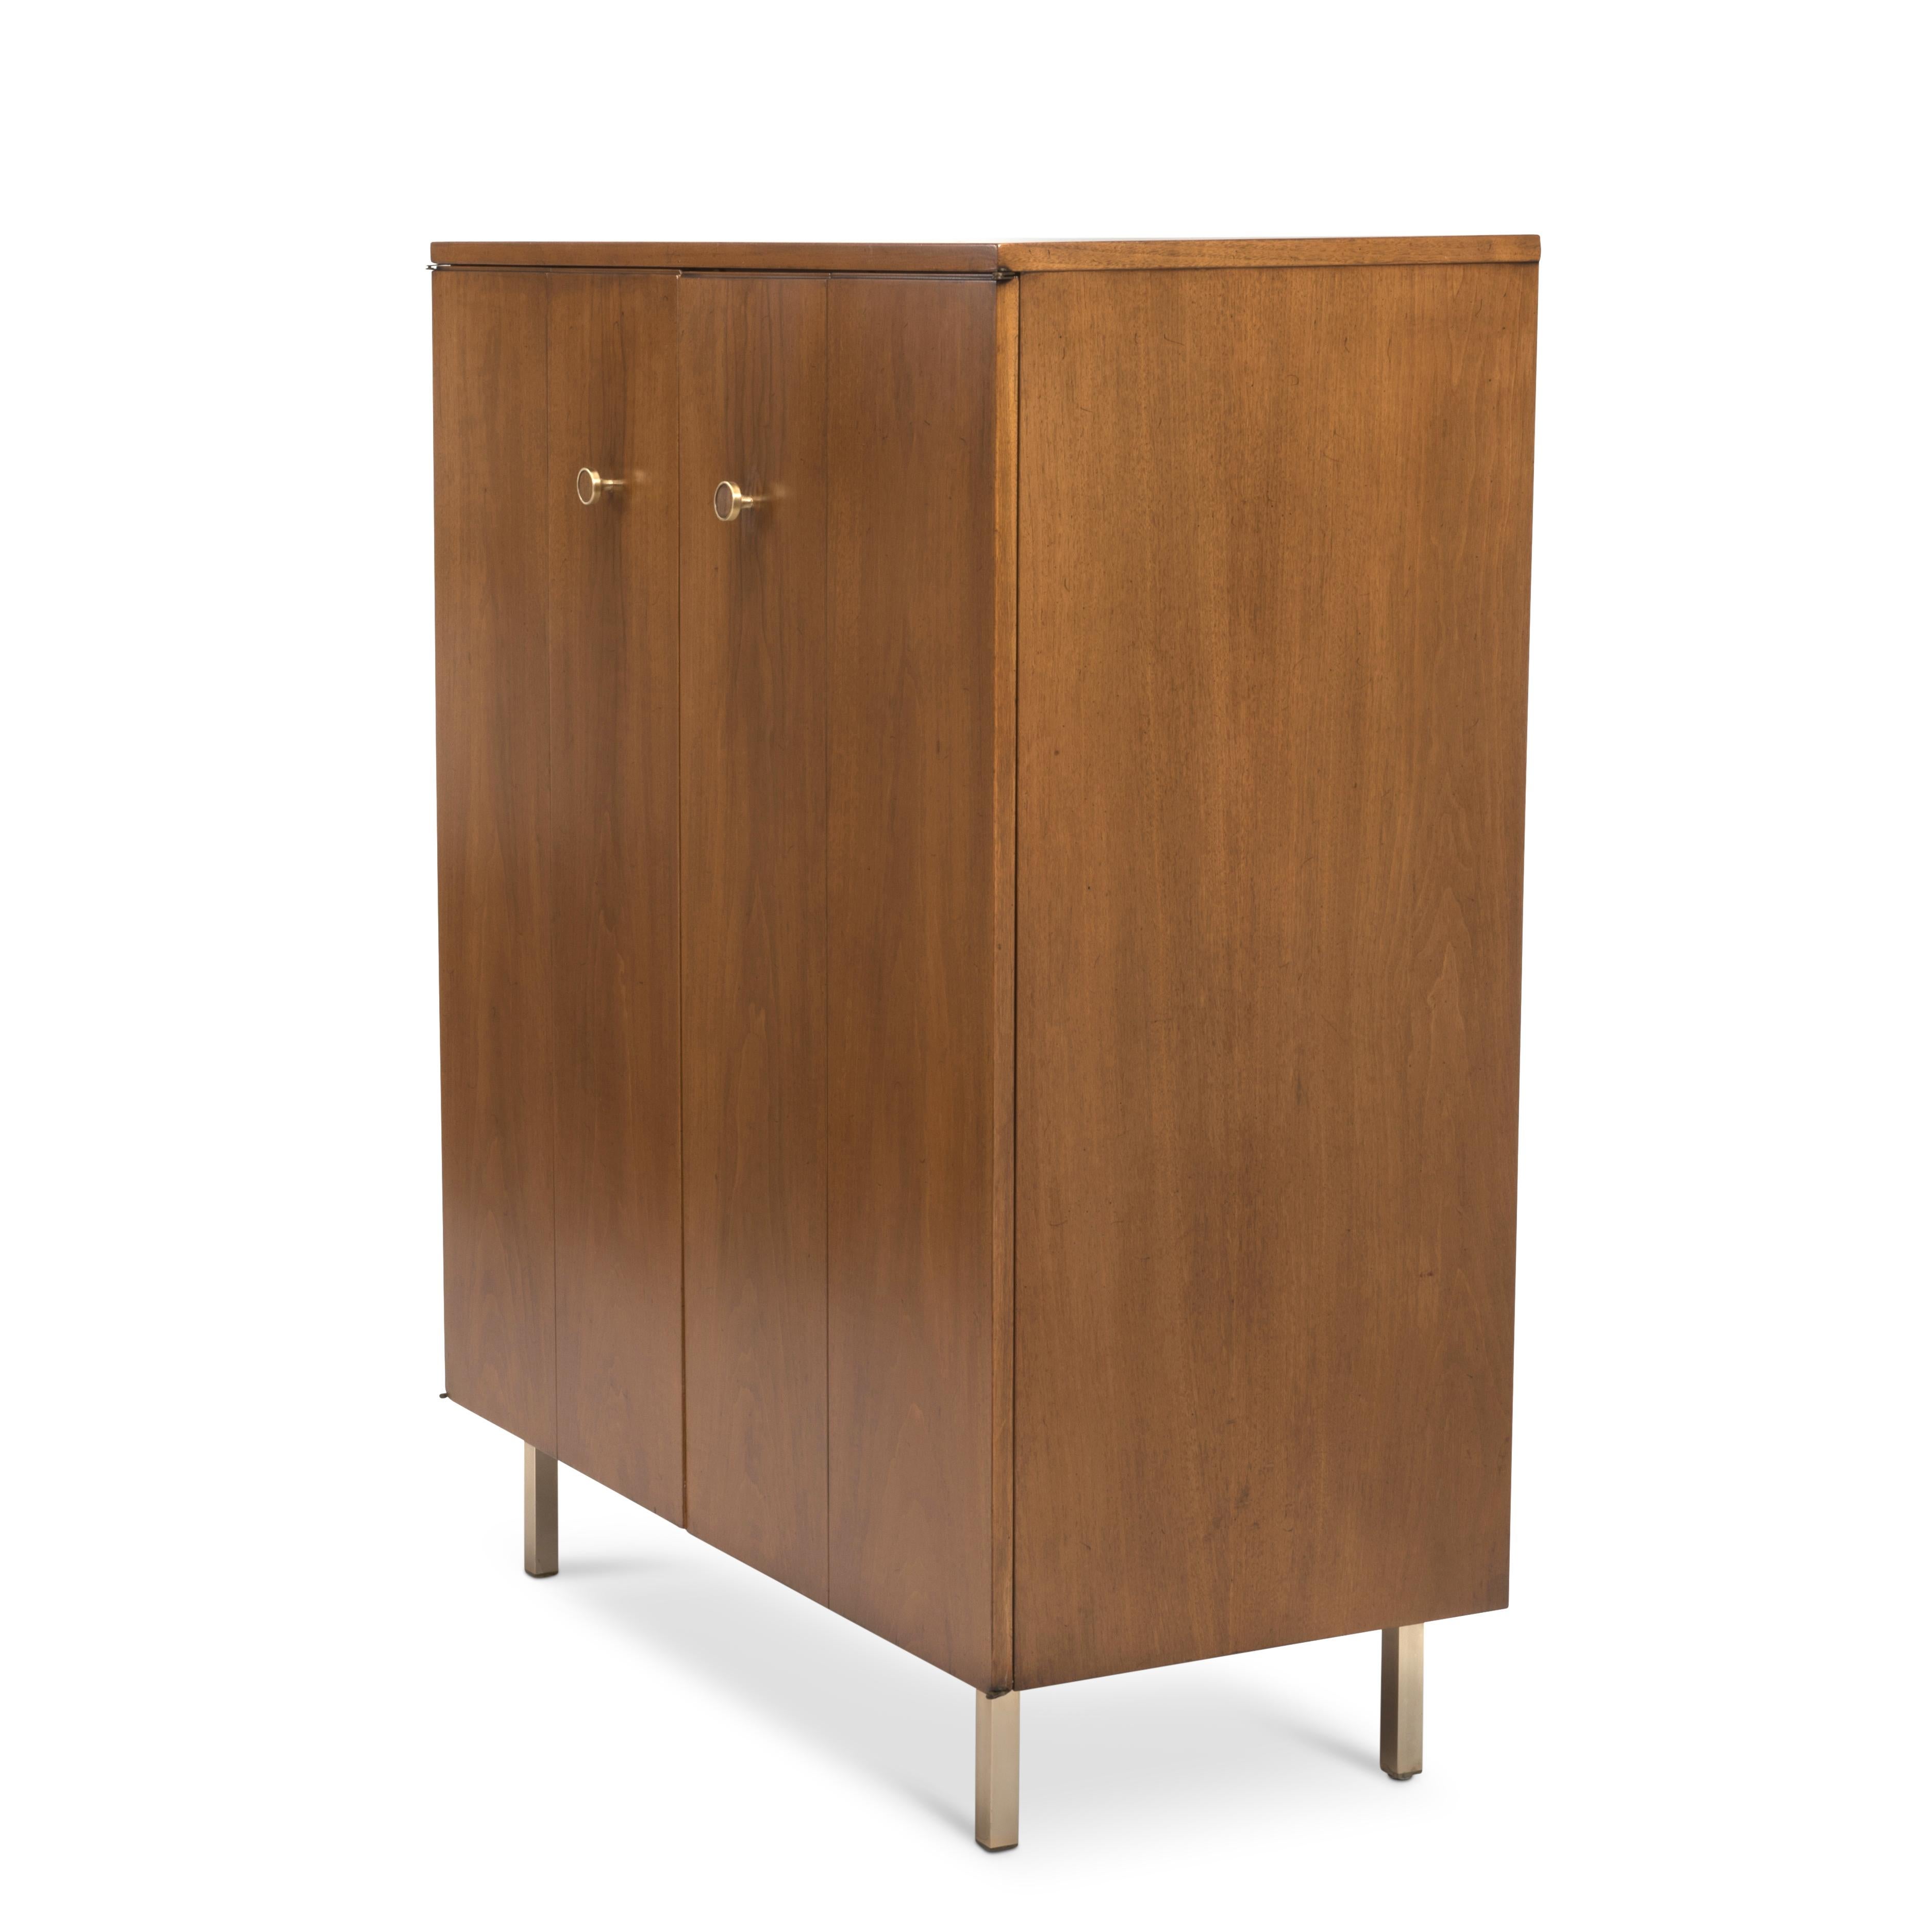 An elegant midcentury Mens tall dresser by Johnson Furniture in a restored satin finish. We are attributing the piece to Paul Frankl. Incredibly well made with brass hardware and feet, piano hinges and excellent proportions. The four front panels